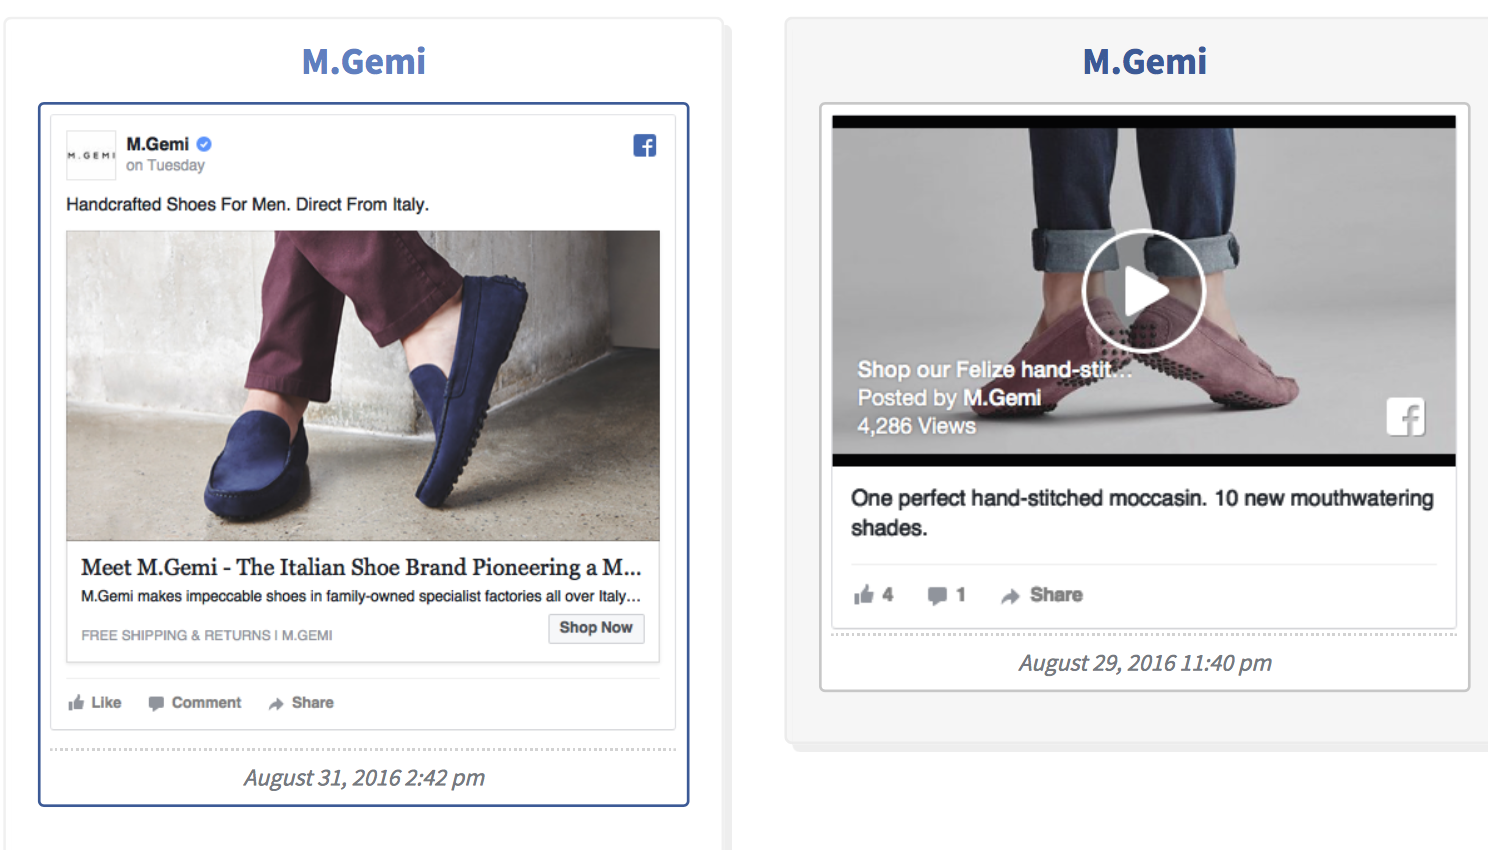 Split Testing 101: How to Actually Split Test Facebook Ads